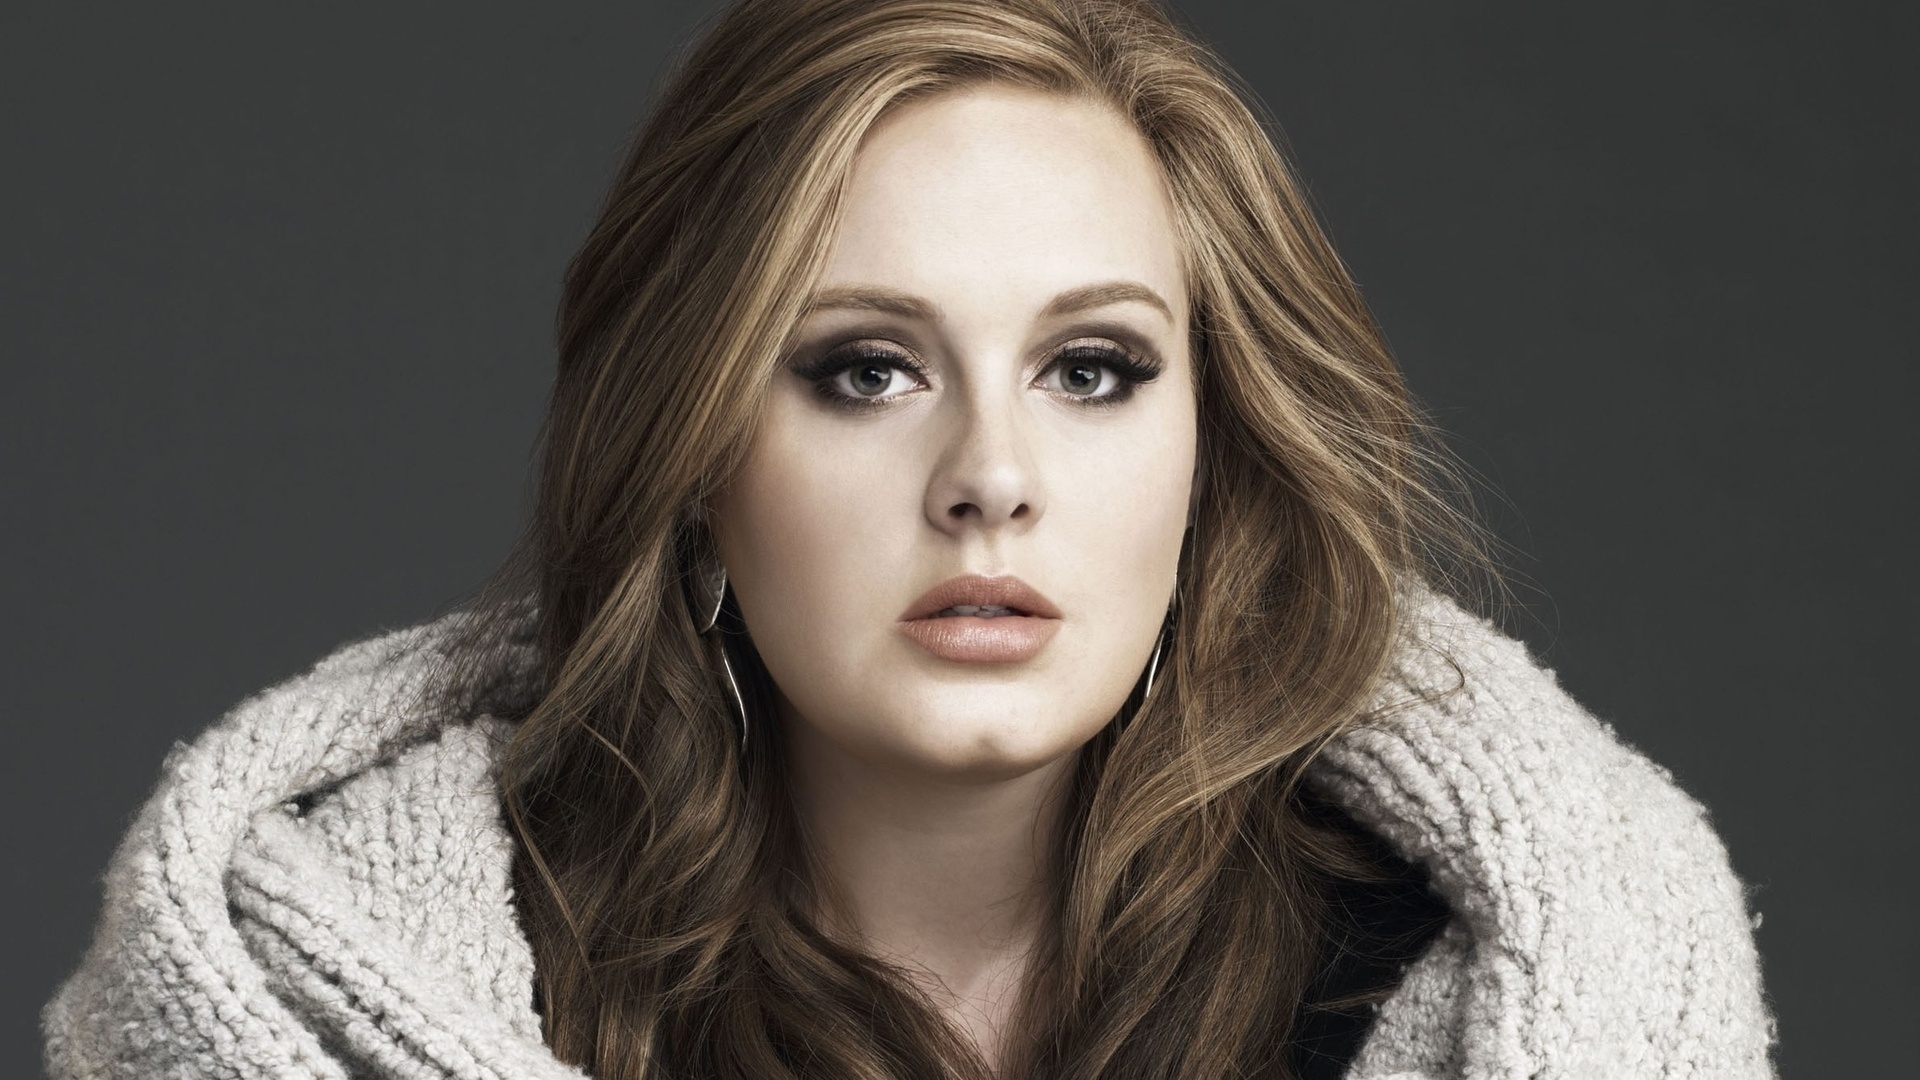 Adele Serious Look for 1920 x 1080 HDTV 1080p resolution